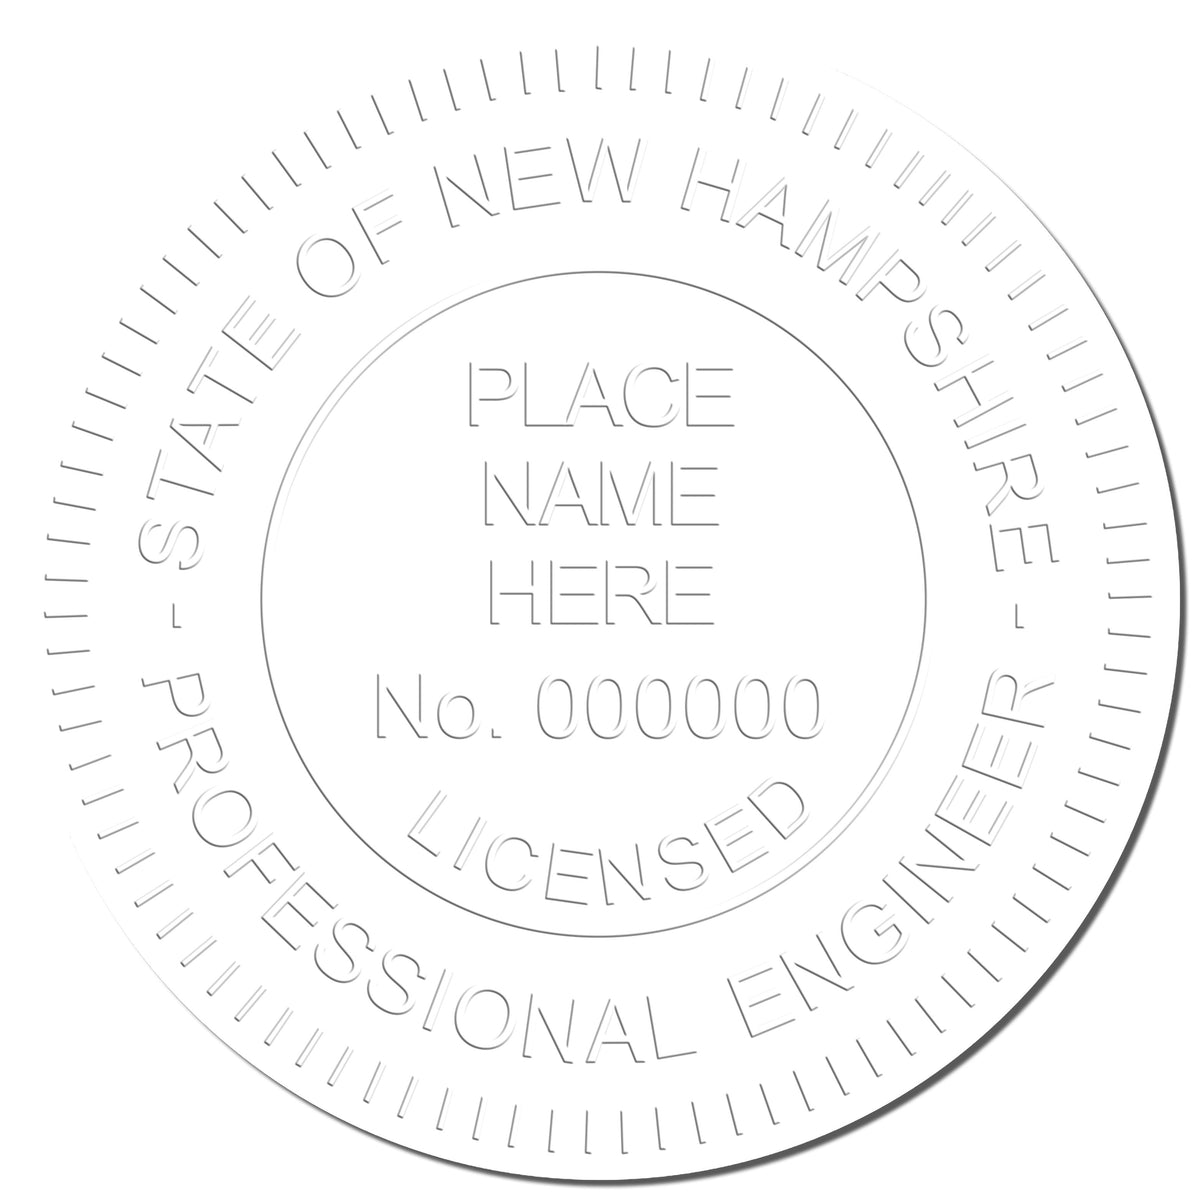 This paper is stamped with a sample imprint of the Hybrid New Hampshire Engineer Seal, signifying its quality and reliability.